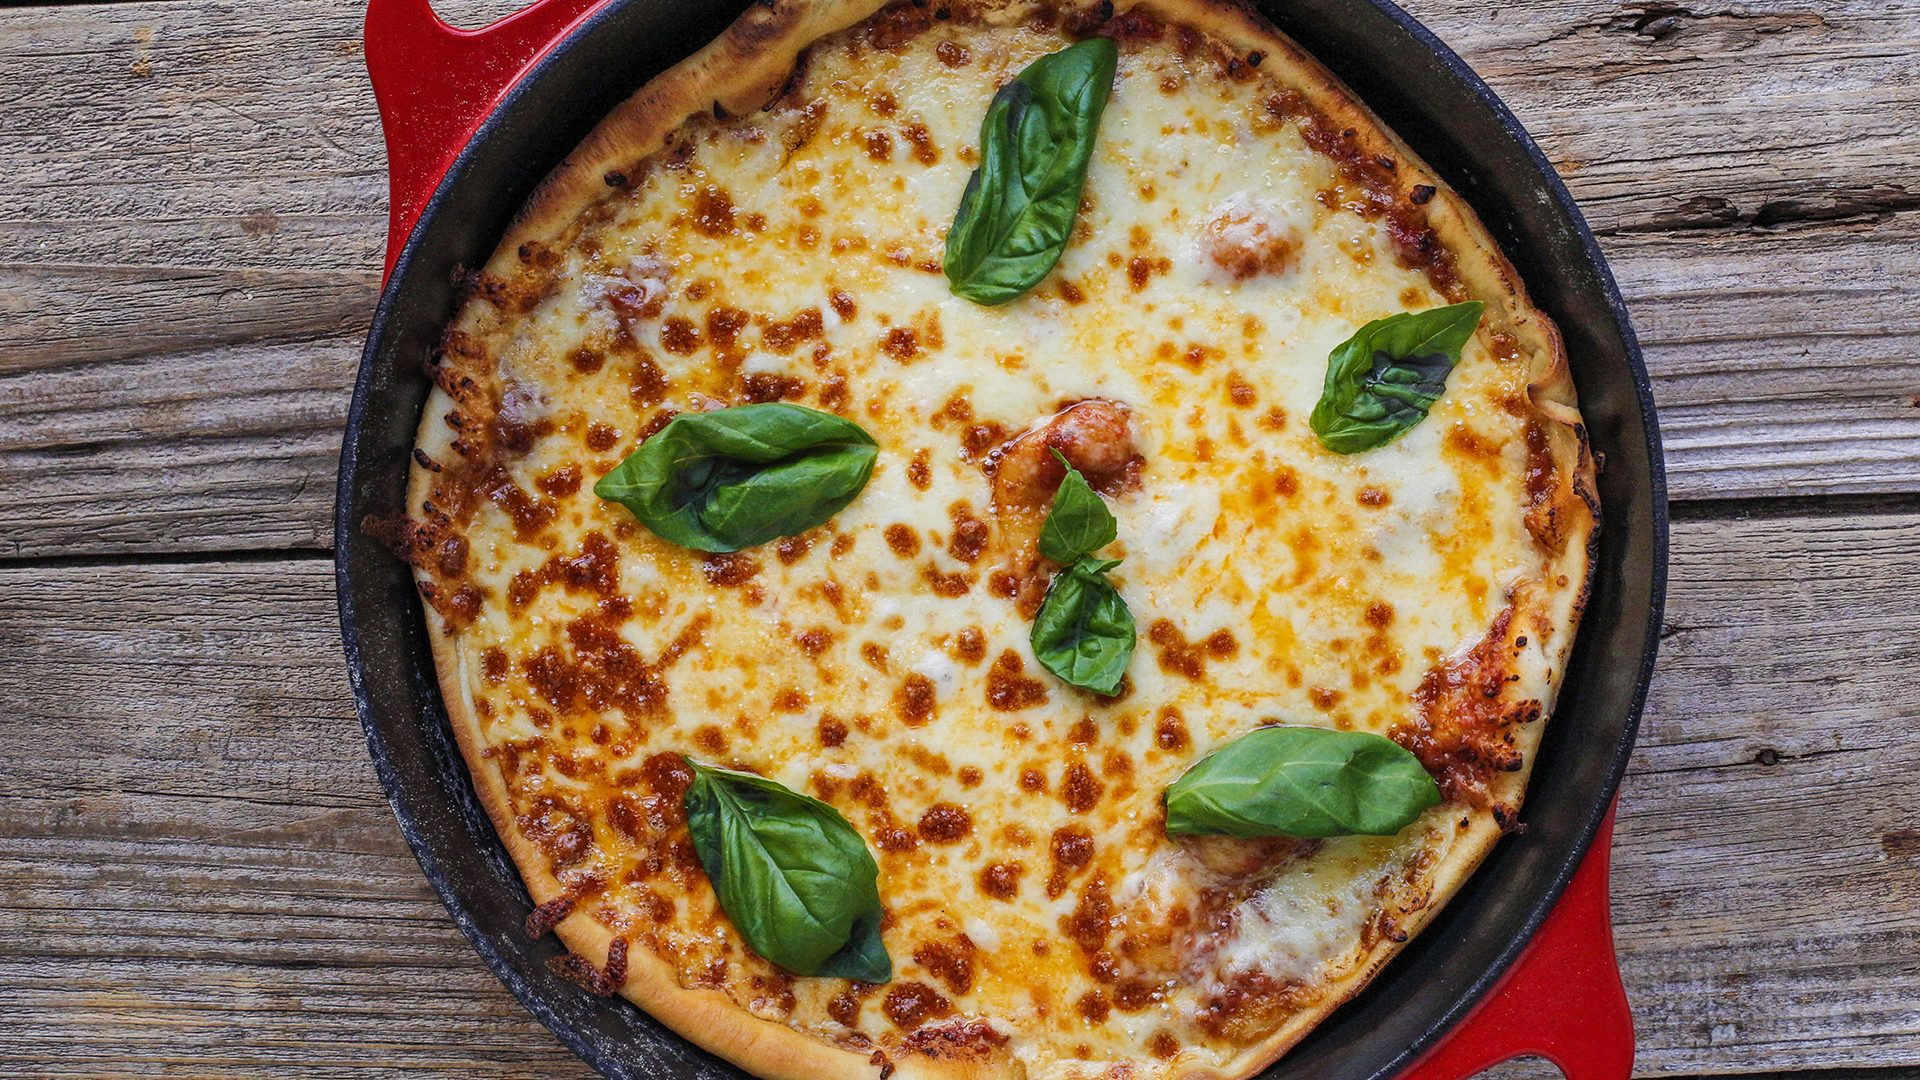 Cast Iron Skillet Pizza Two Ways